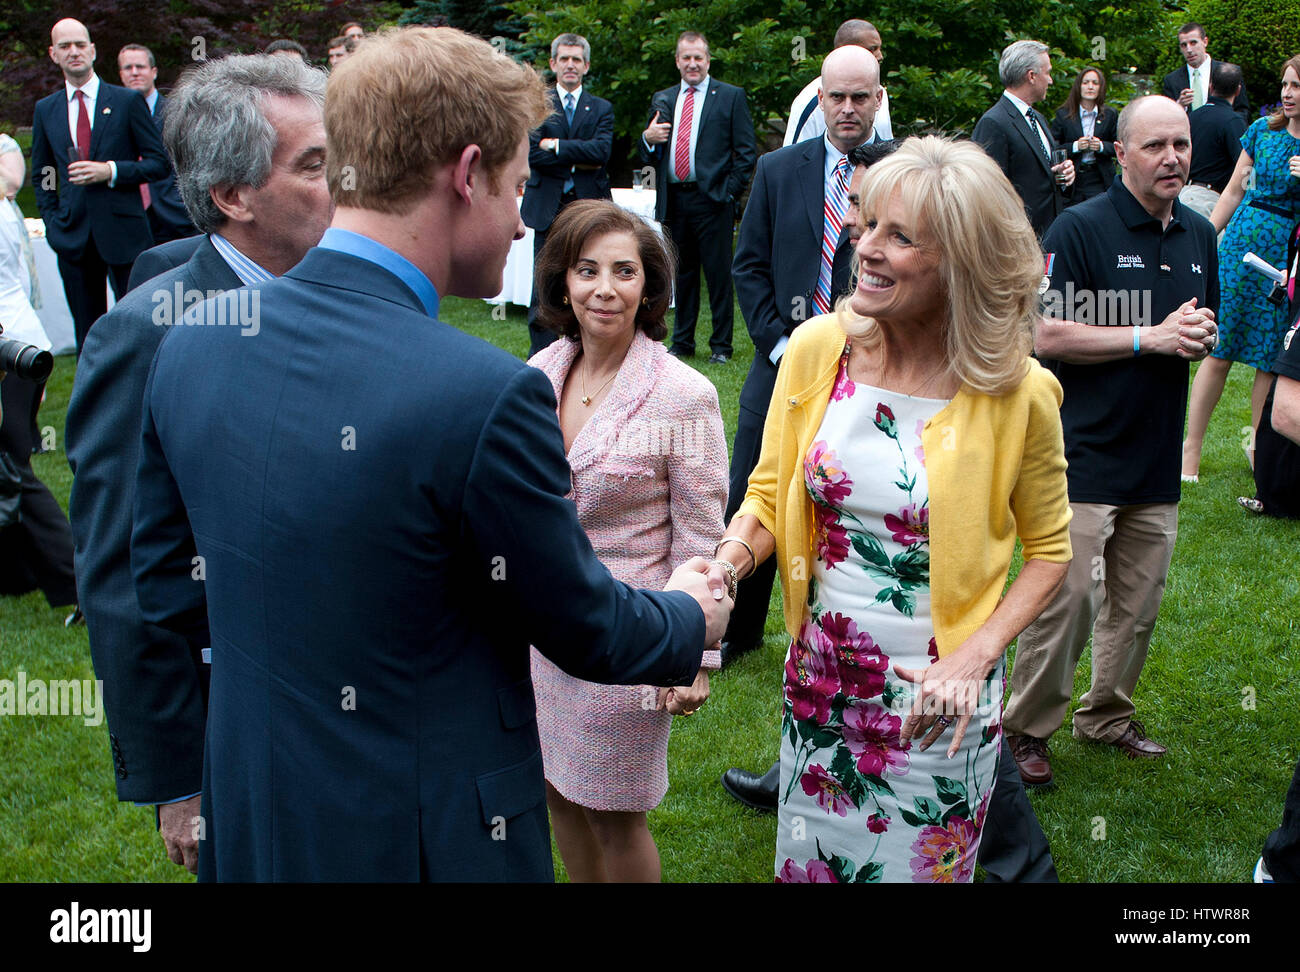 Prince Harry greets Dr Jill Biden (R), the wife of U.S Vice President Joe Biden, during a reception for U.S and British wounded warriors at the British Ambassador's Residence in Washington, D.C on May 7, 2012 . Stock Photo